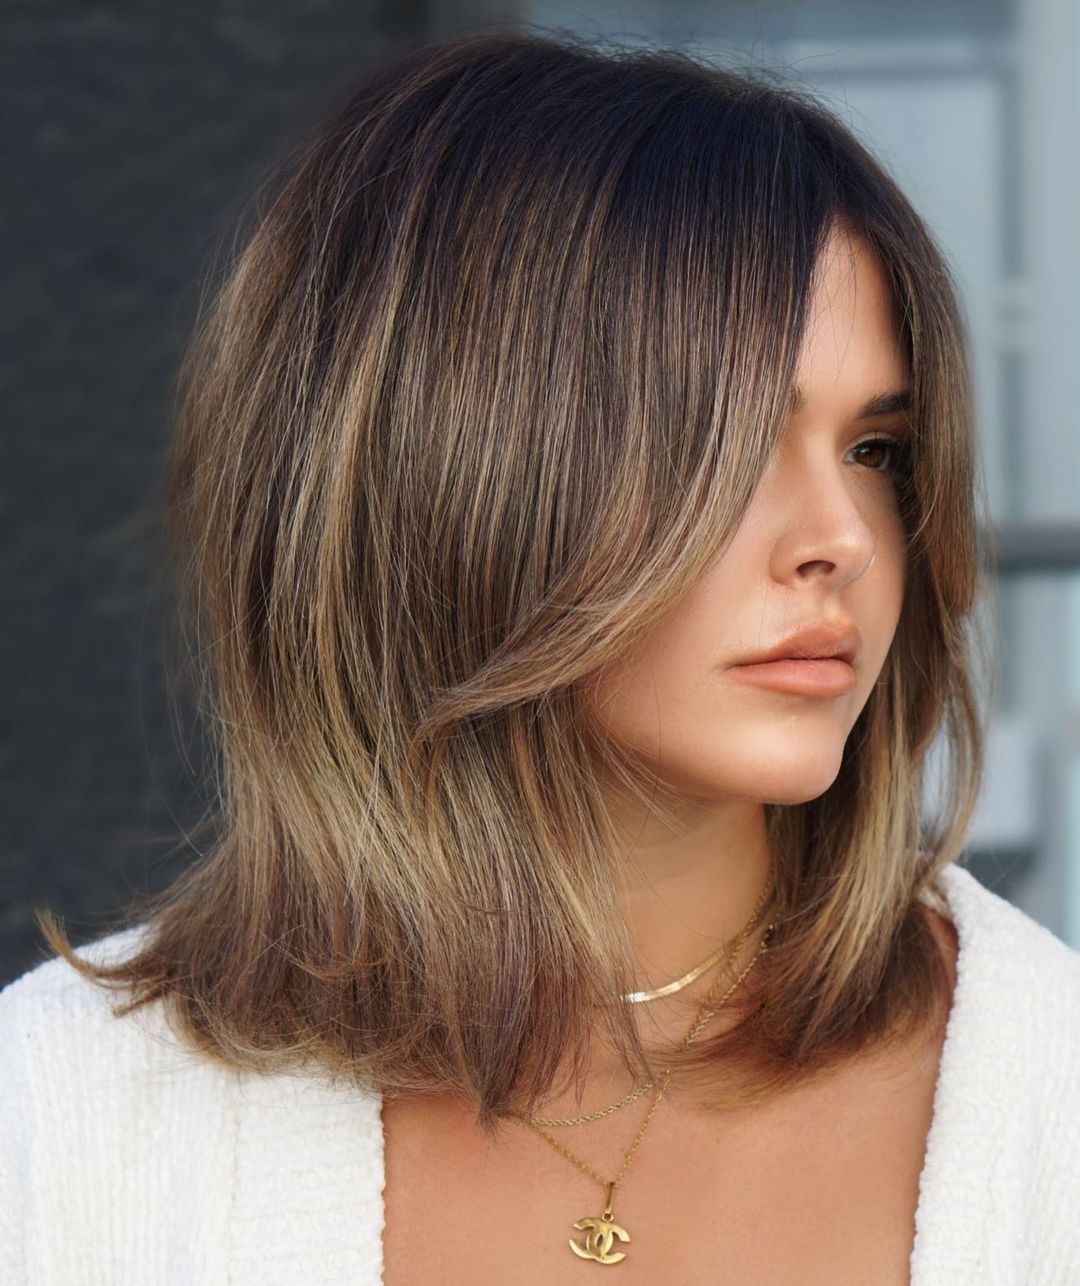 Straight Collarbone Length Hair with Long Curtain Bangs